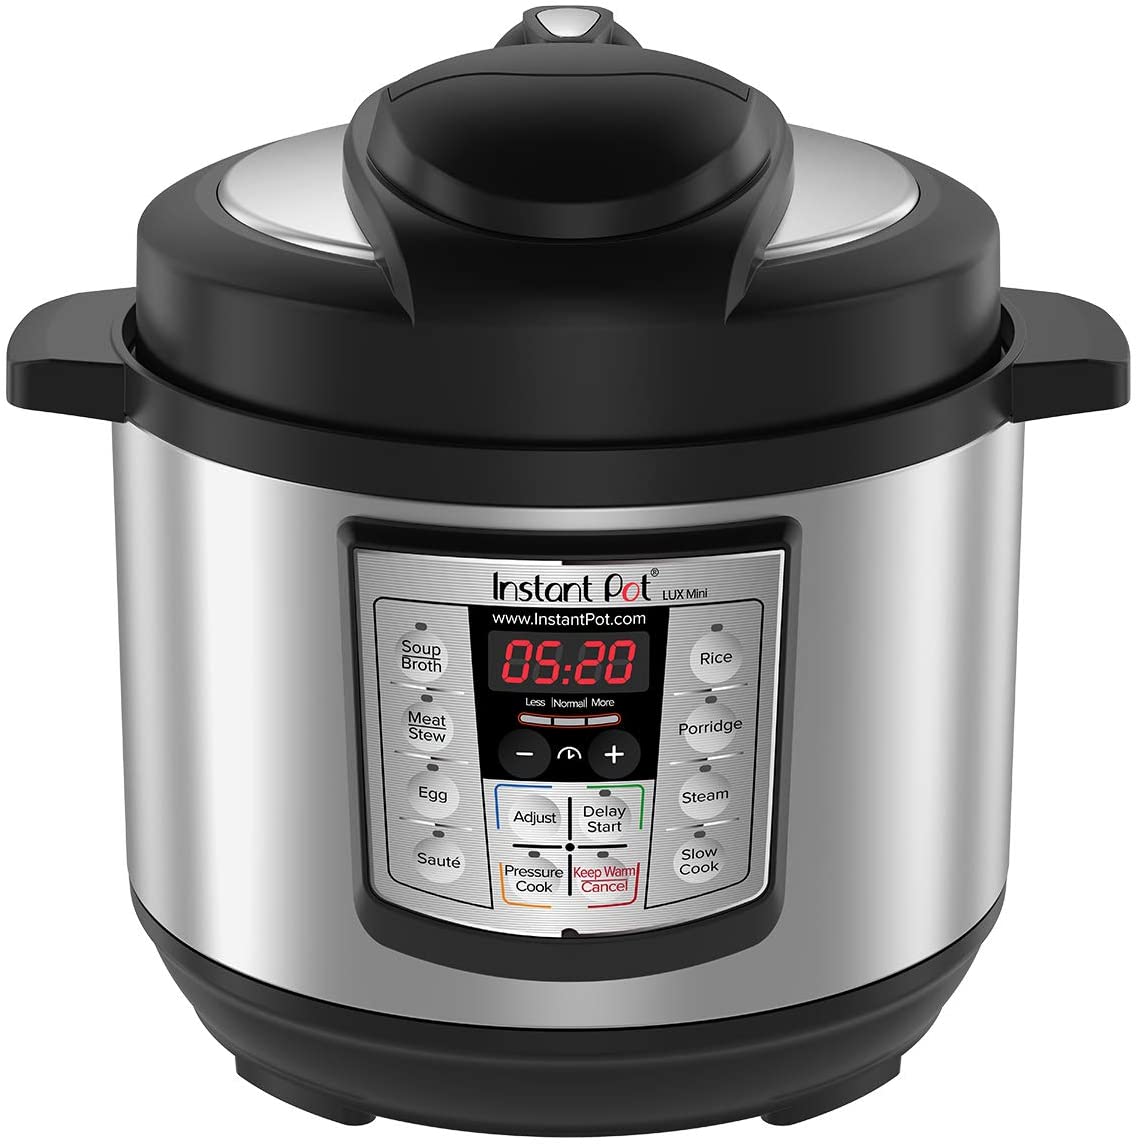 Instant Pot Lux Mini 6-in-1 Electric Pressure Cooker, Sterilizer Slow Cooker, Rice Cooker, Steamer, Saute, and Warmer, 3 Quart, 10 One-Touch Programs